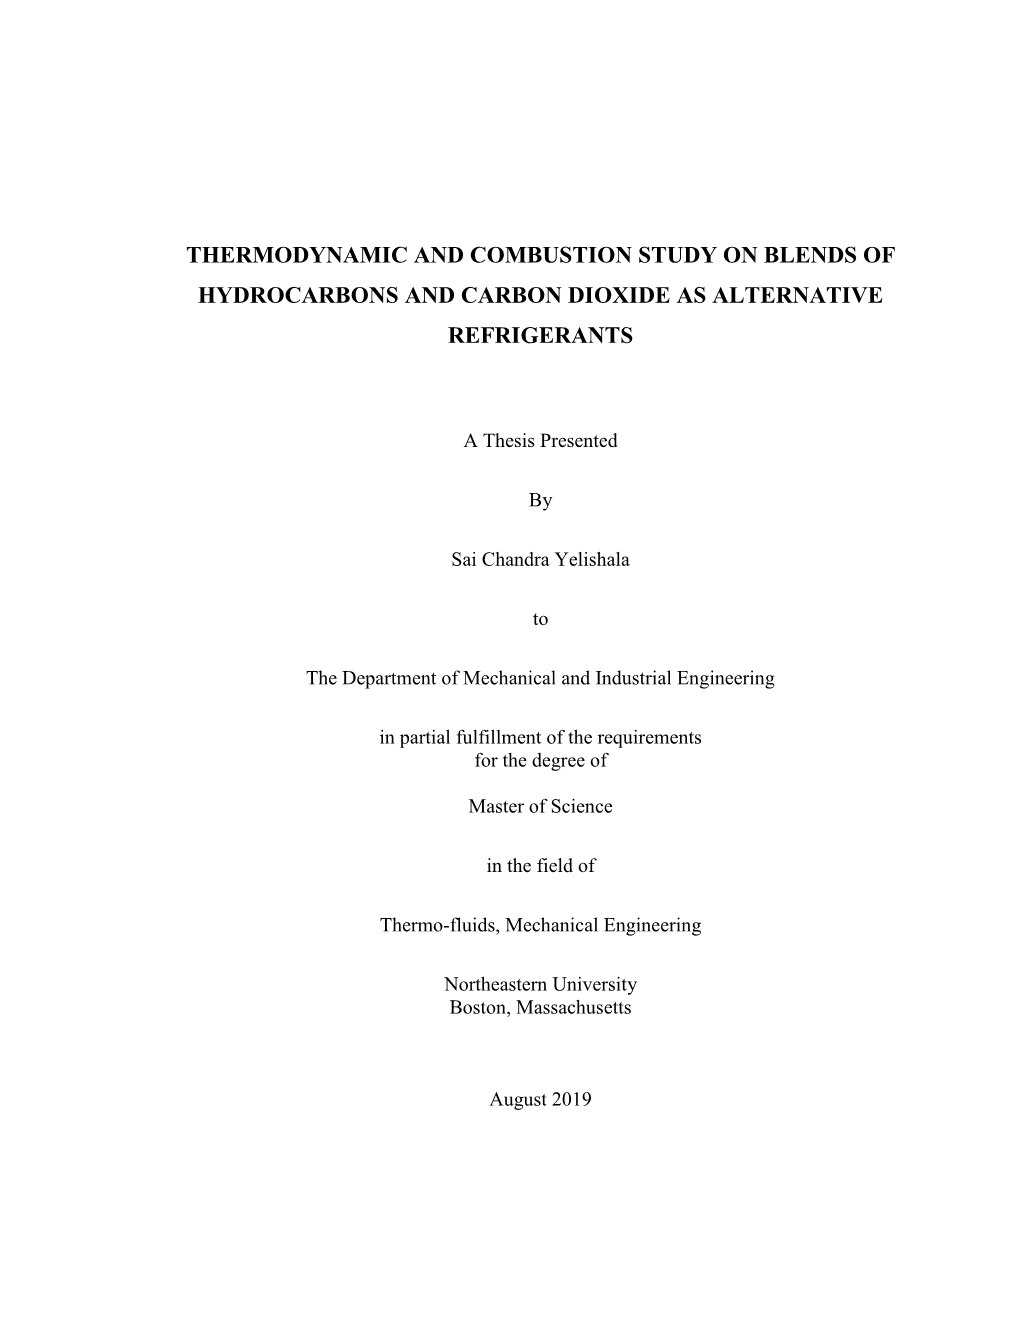 Thermodynamic and Combustion Study on Blends of Hydrocarbons and Carbon Dioxide As Alternative Refrigerants